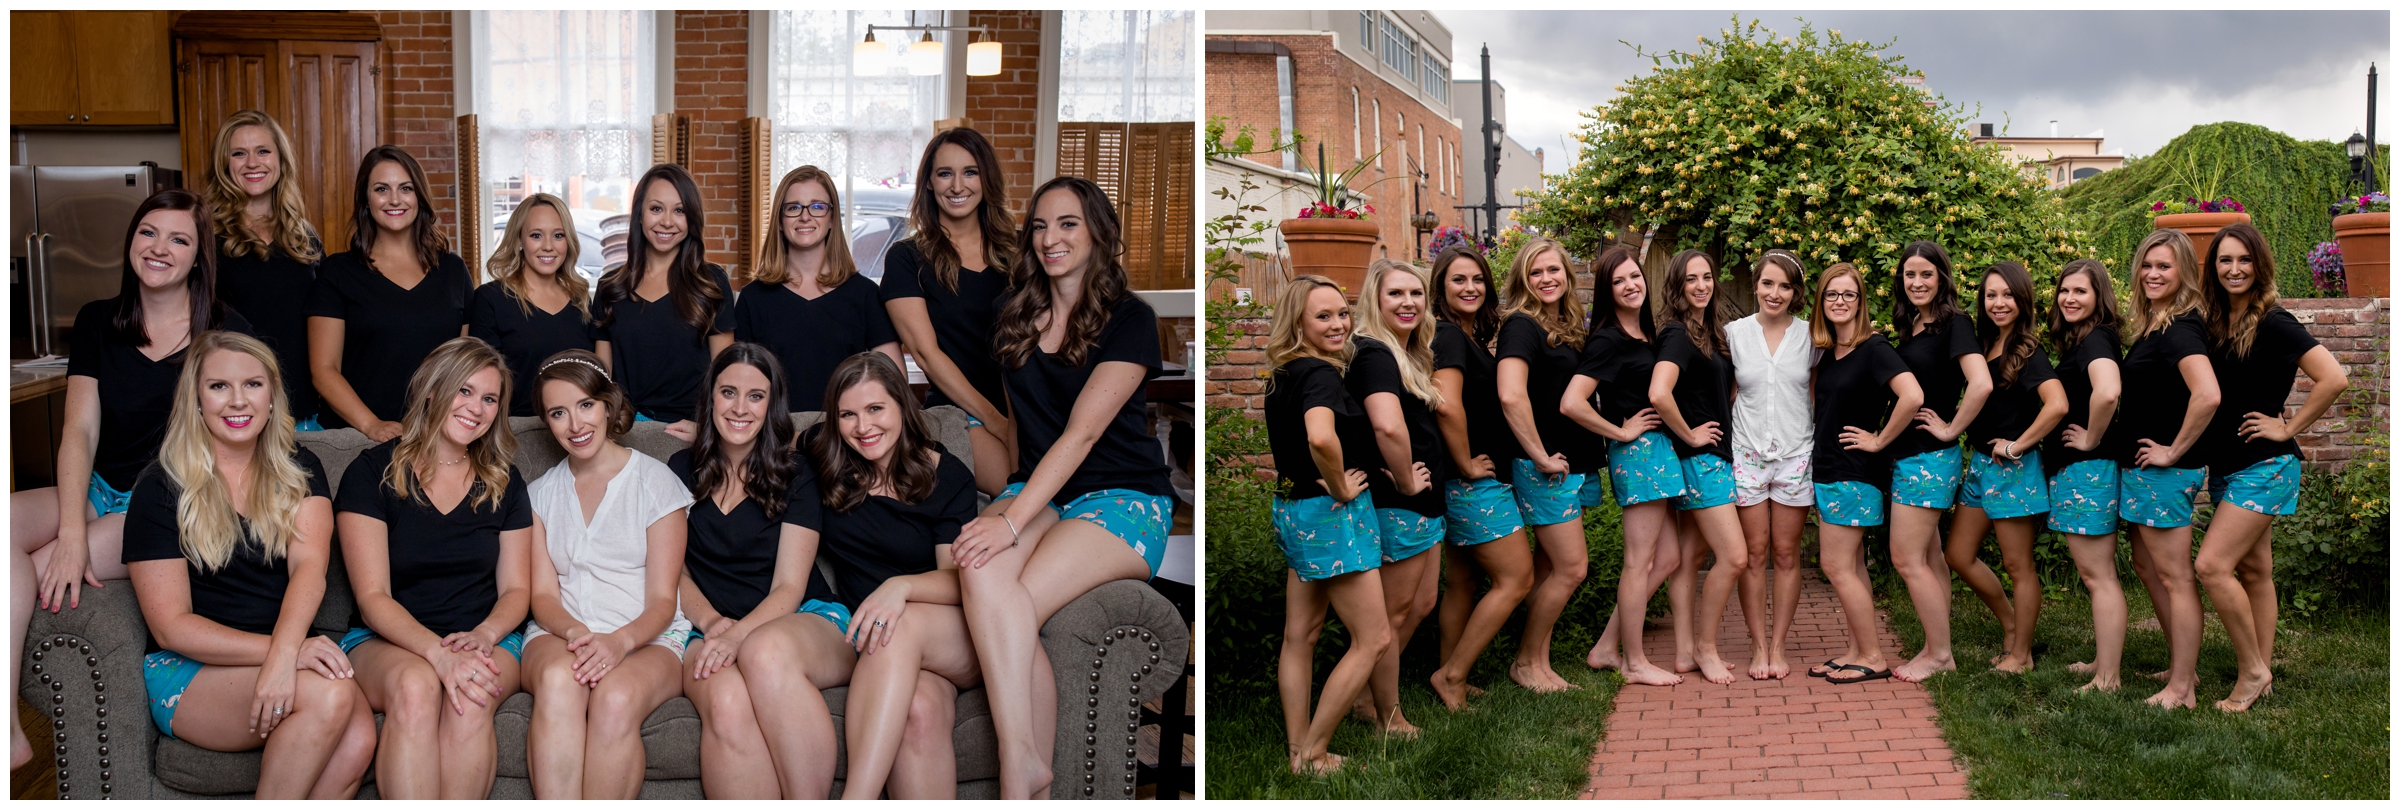 bridesmaids in matching shorts and t-shirts posing with bride